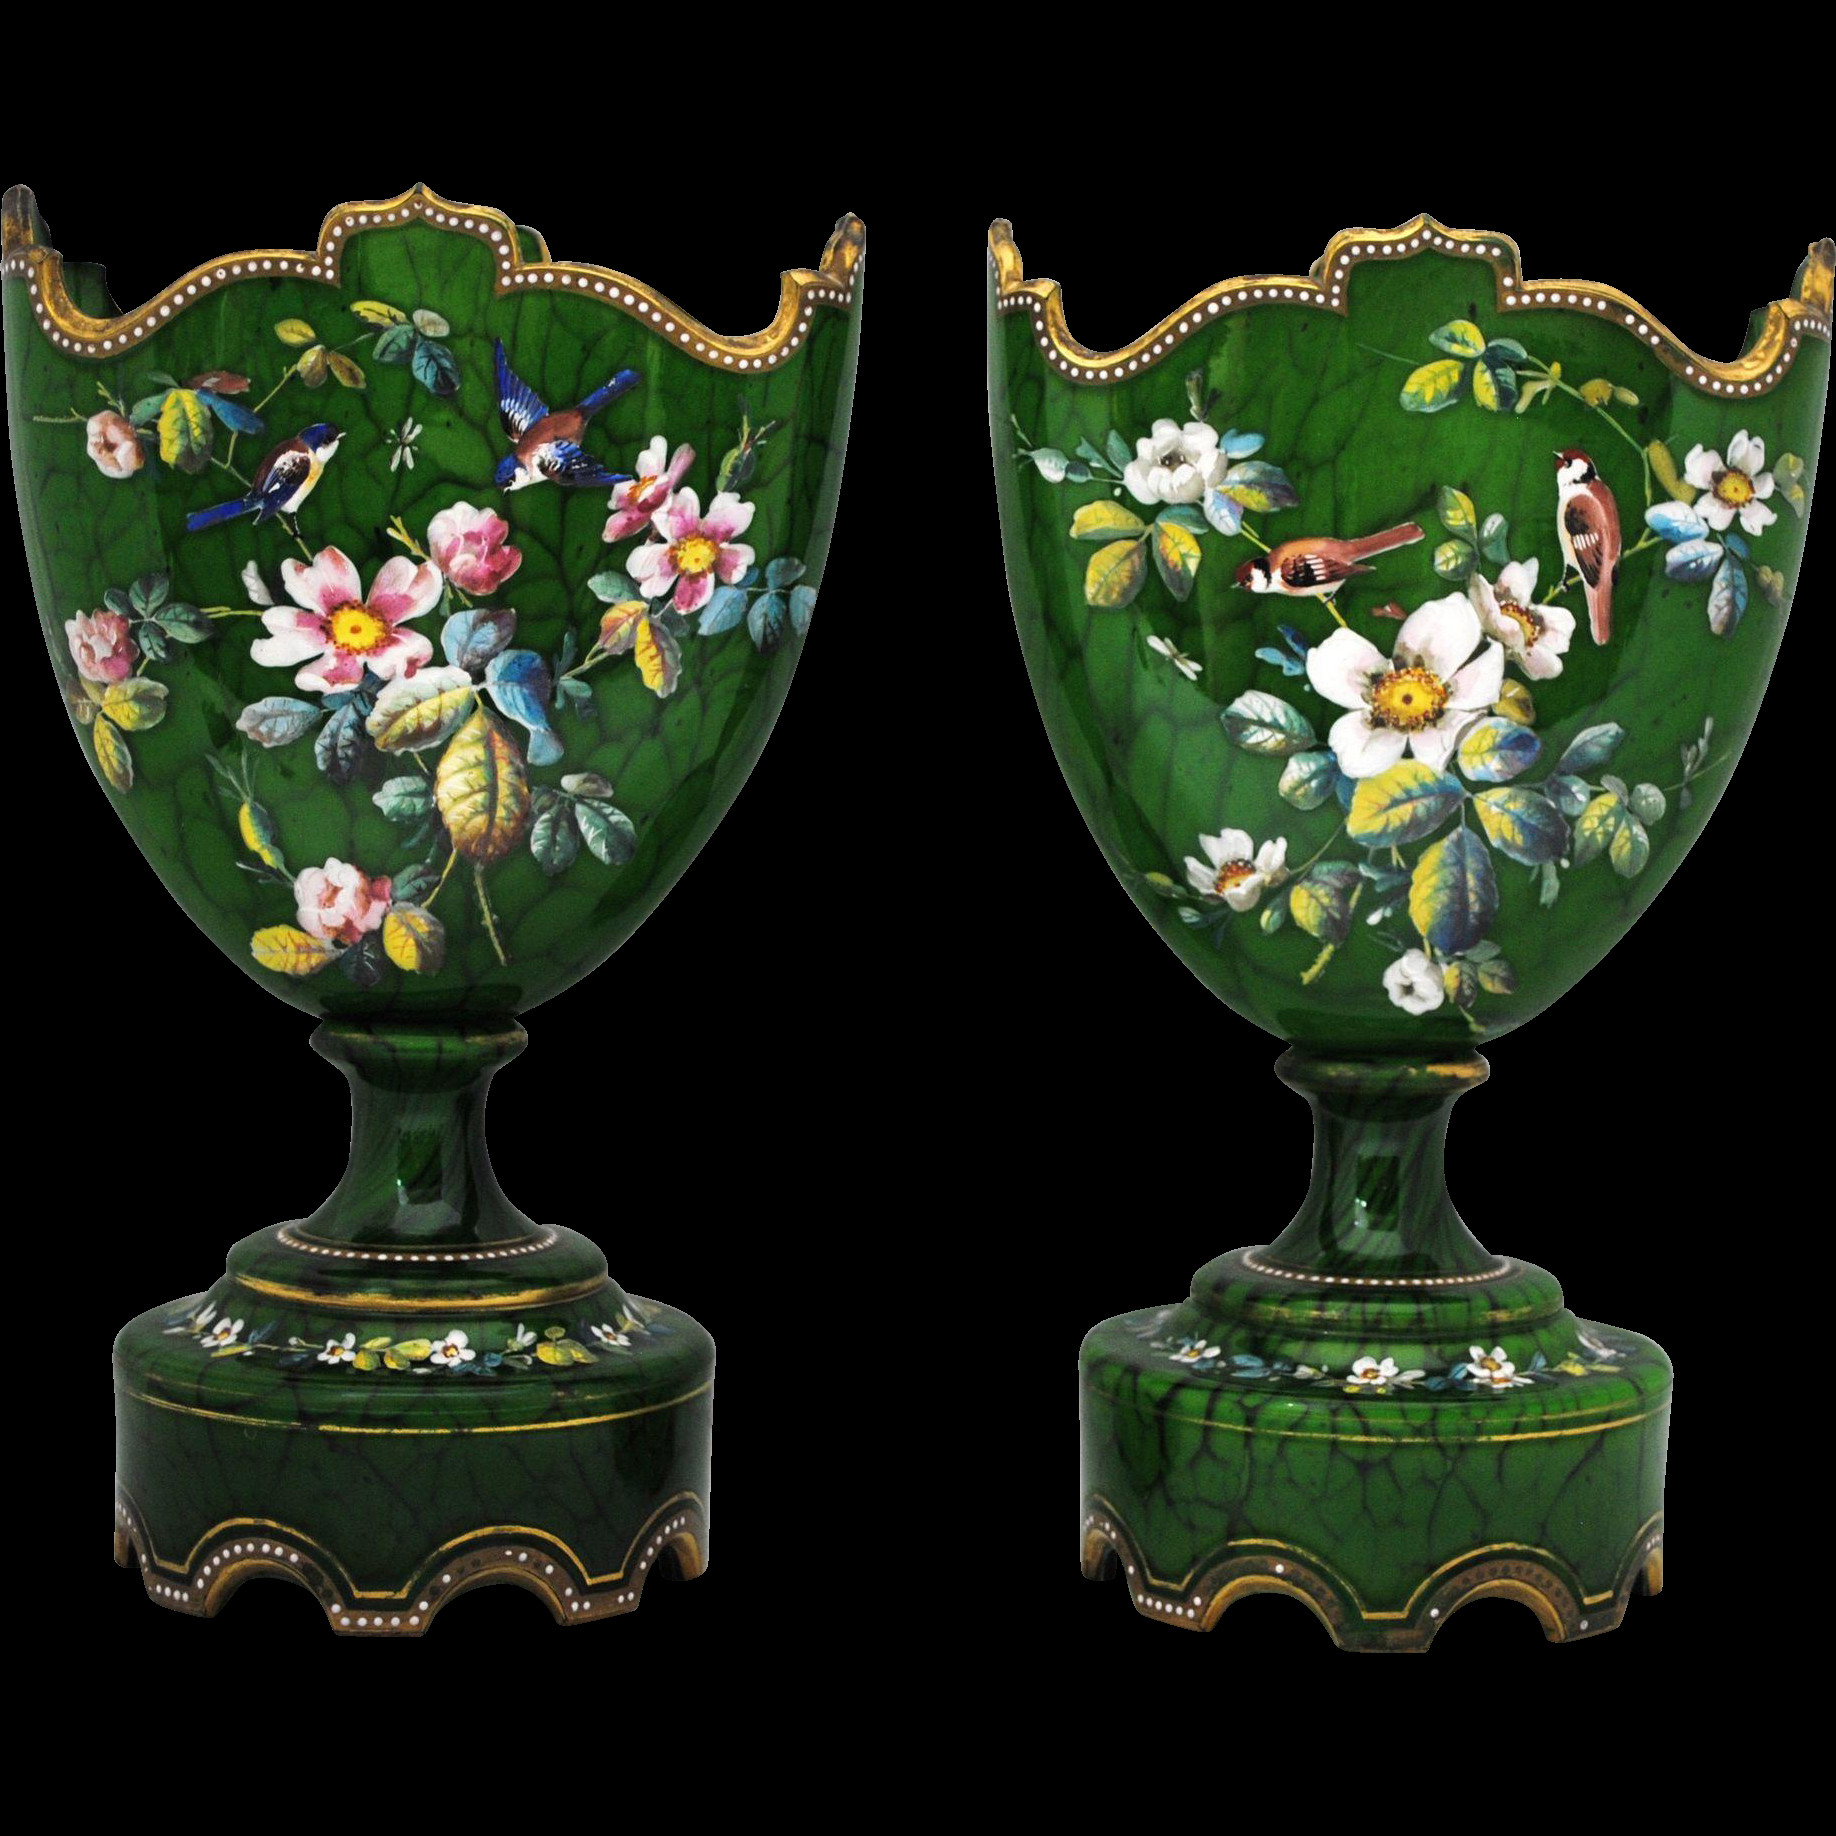 30 Popular Czech Art Glass Vase 2024 free download czech art glass vase of bohemian czech harrach 13 brown opal art glass vase ename with pair of continental green victorian enamel glass mantle vases with birds